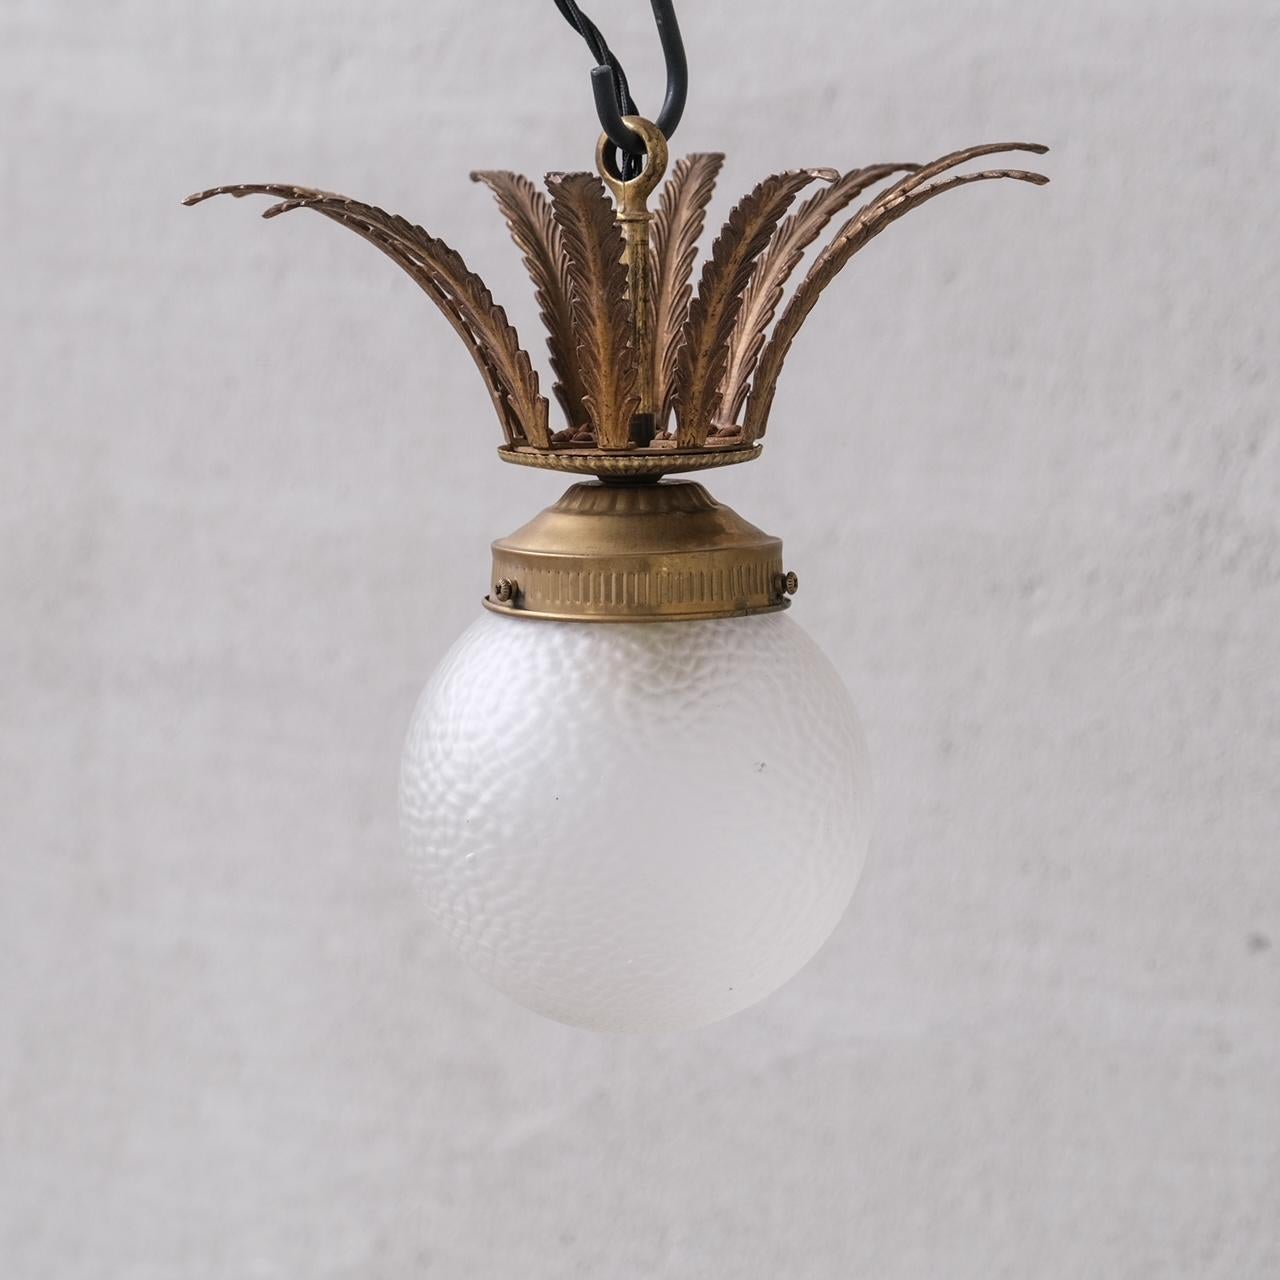 A brass and glass pendant light.

Unusual brass leaf gallery.

Playful and decorative.

France, c1950s.

No chain or rose was retained, however they are easy to source online.

Good vintage condtion, re-wired and PAT tested.

Location: Belgium